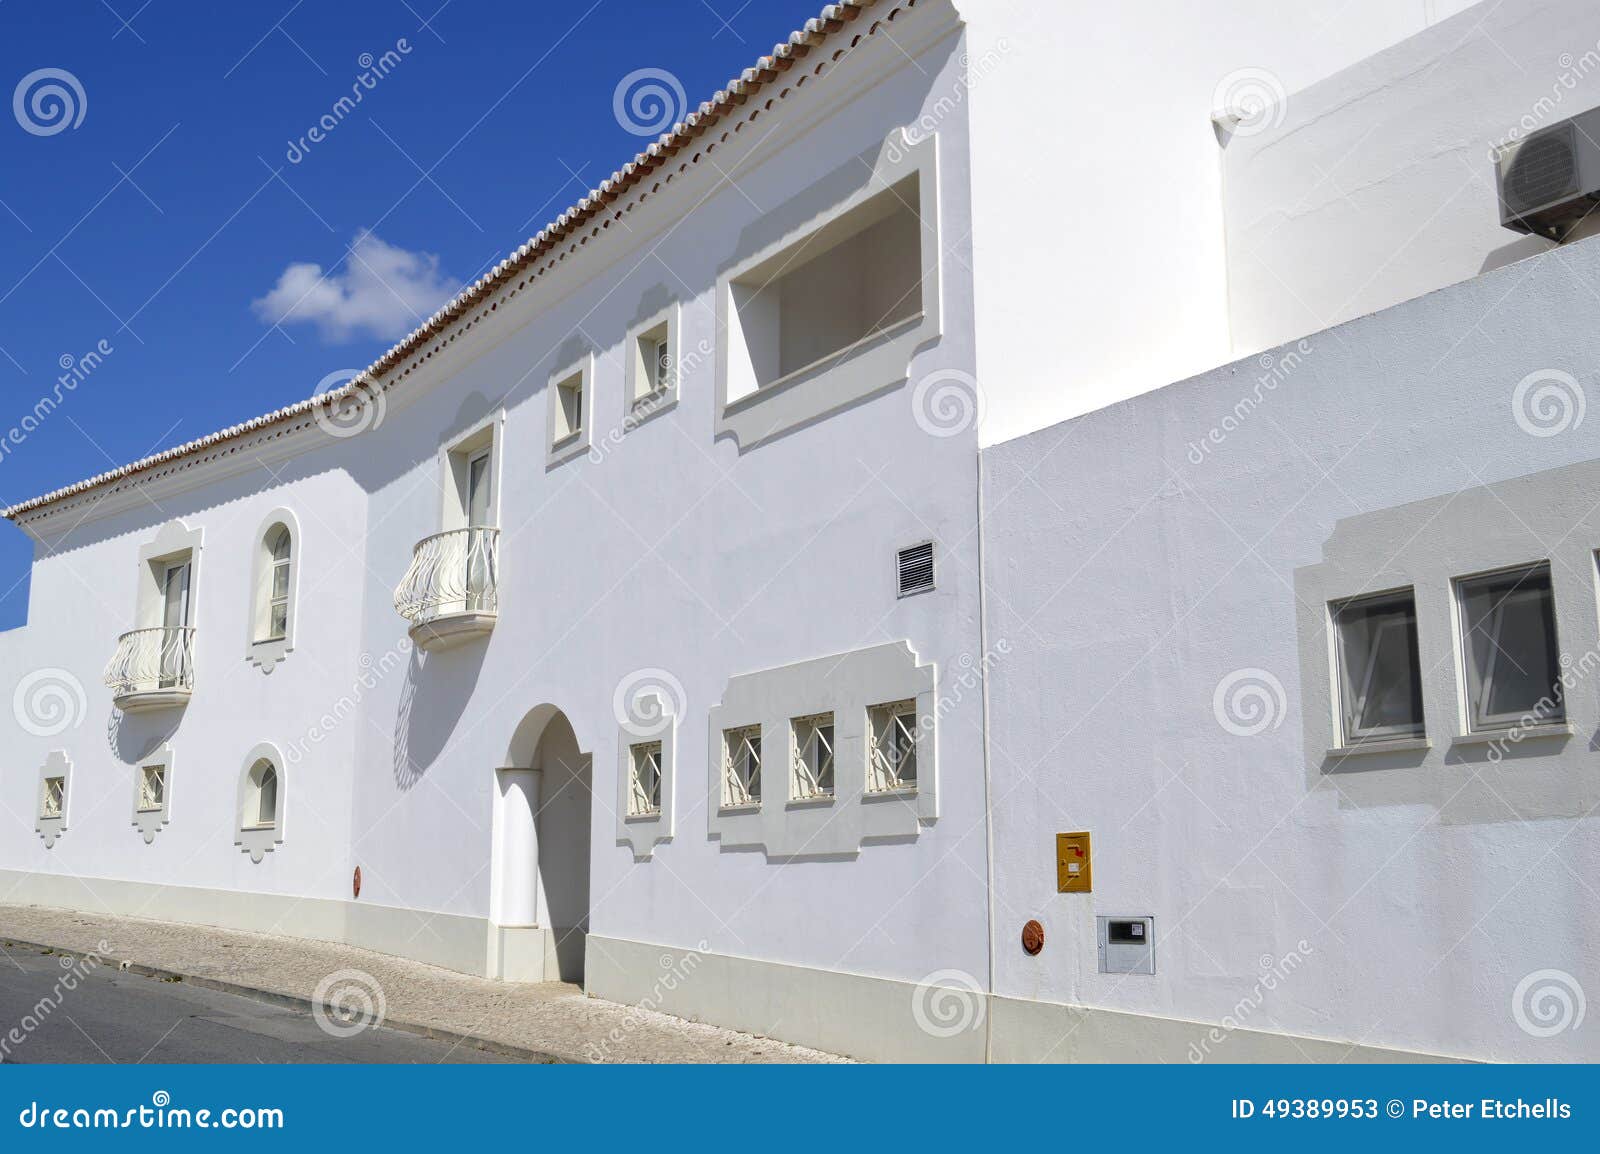 house in the village of armacao de pera